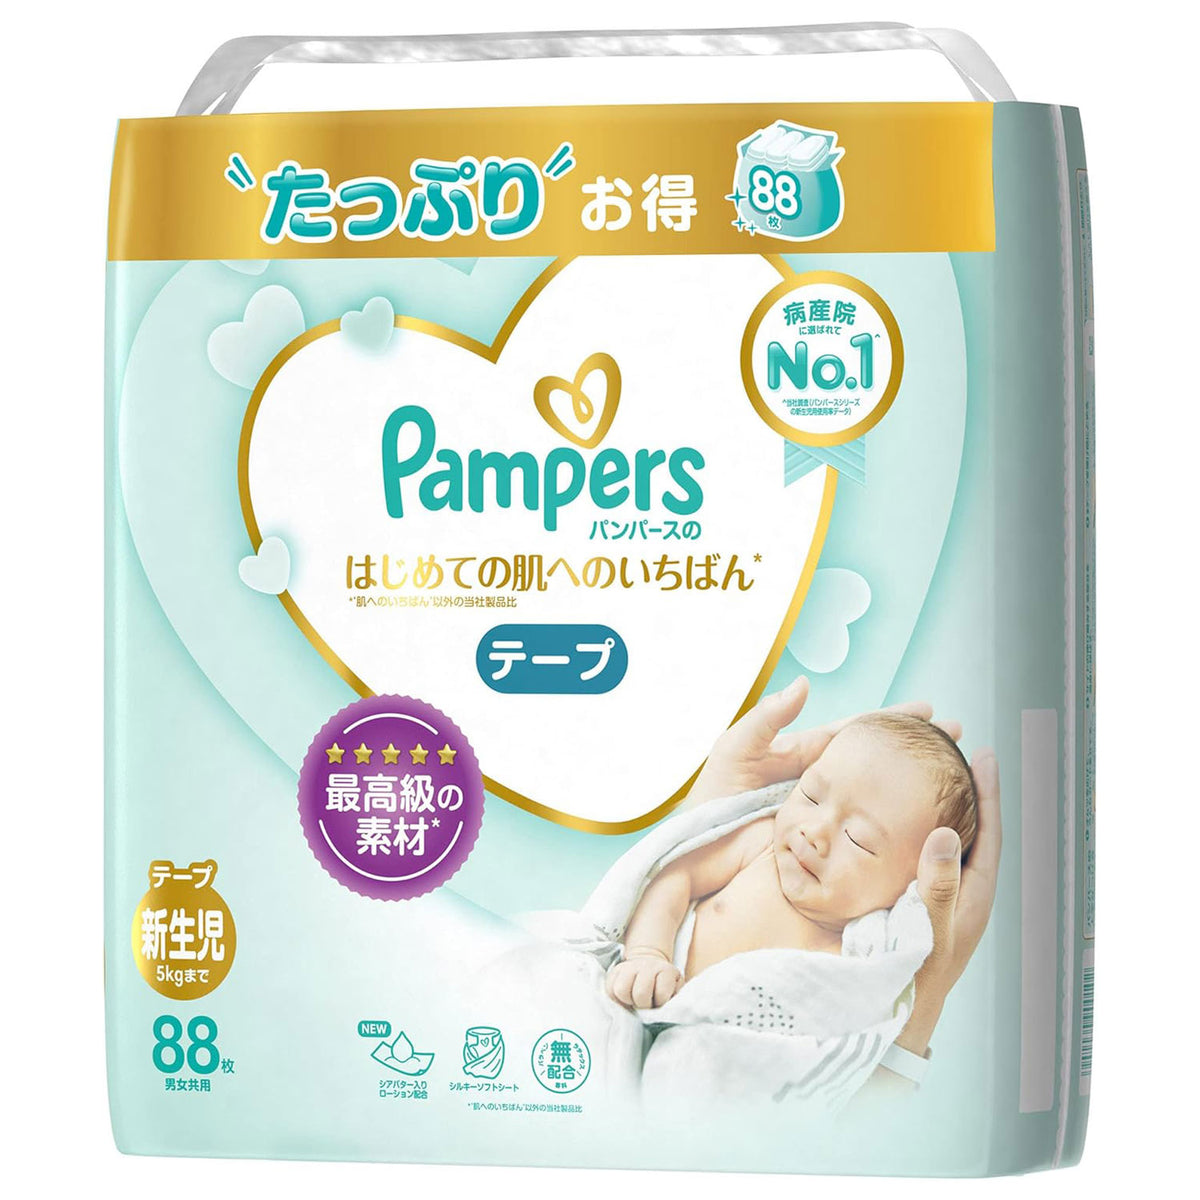 Pampers Ichiban Diaper Tape Best for Baby's First Skin Size NB (Up to 5kg) 88pcs Ultra Jumbo